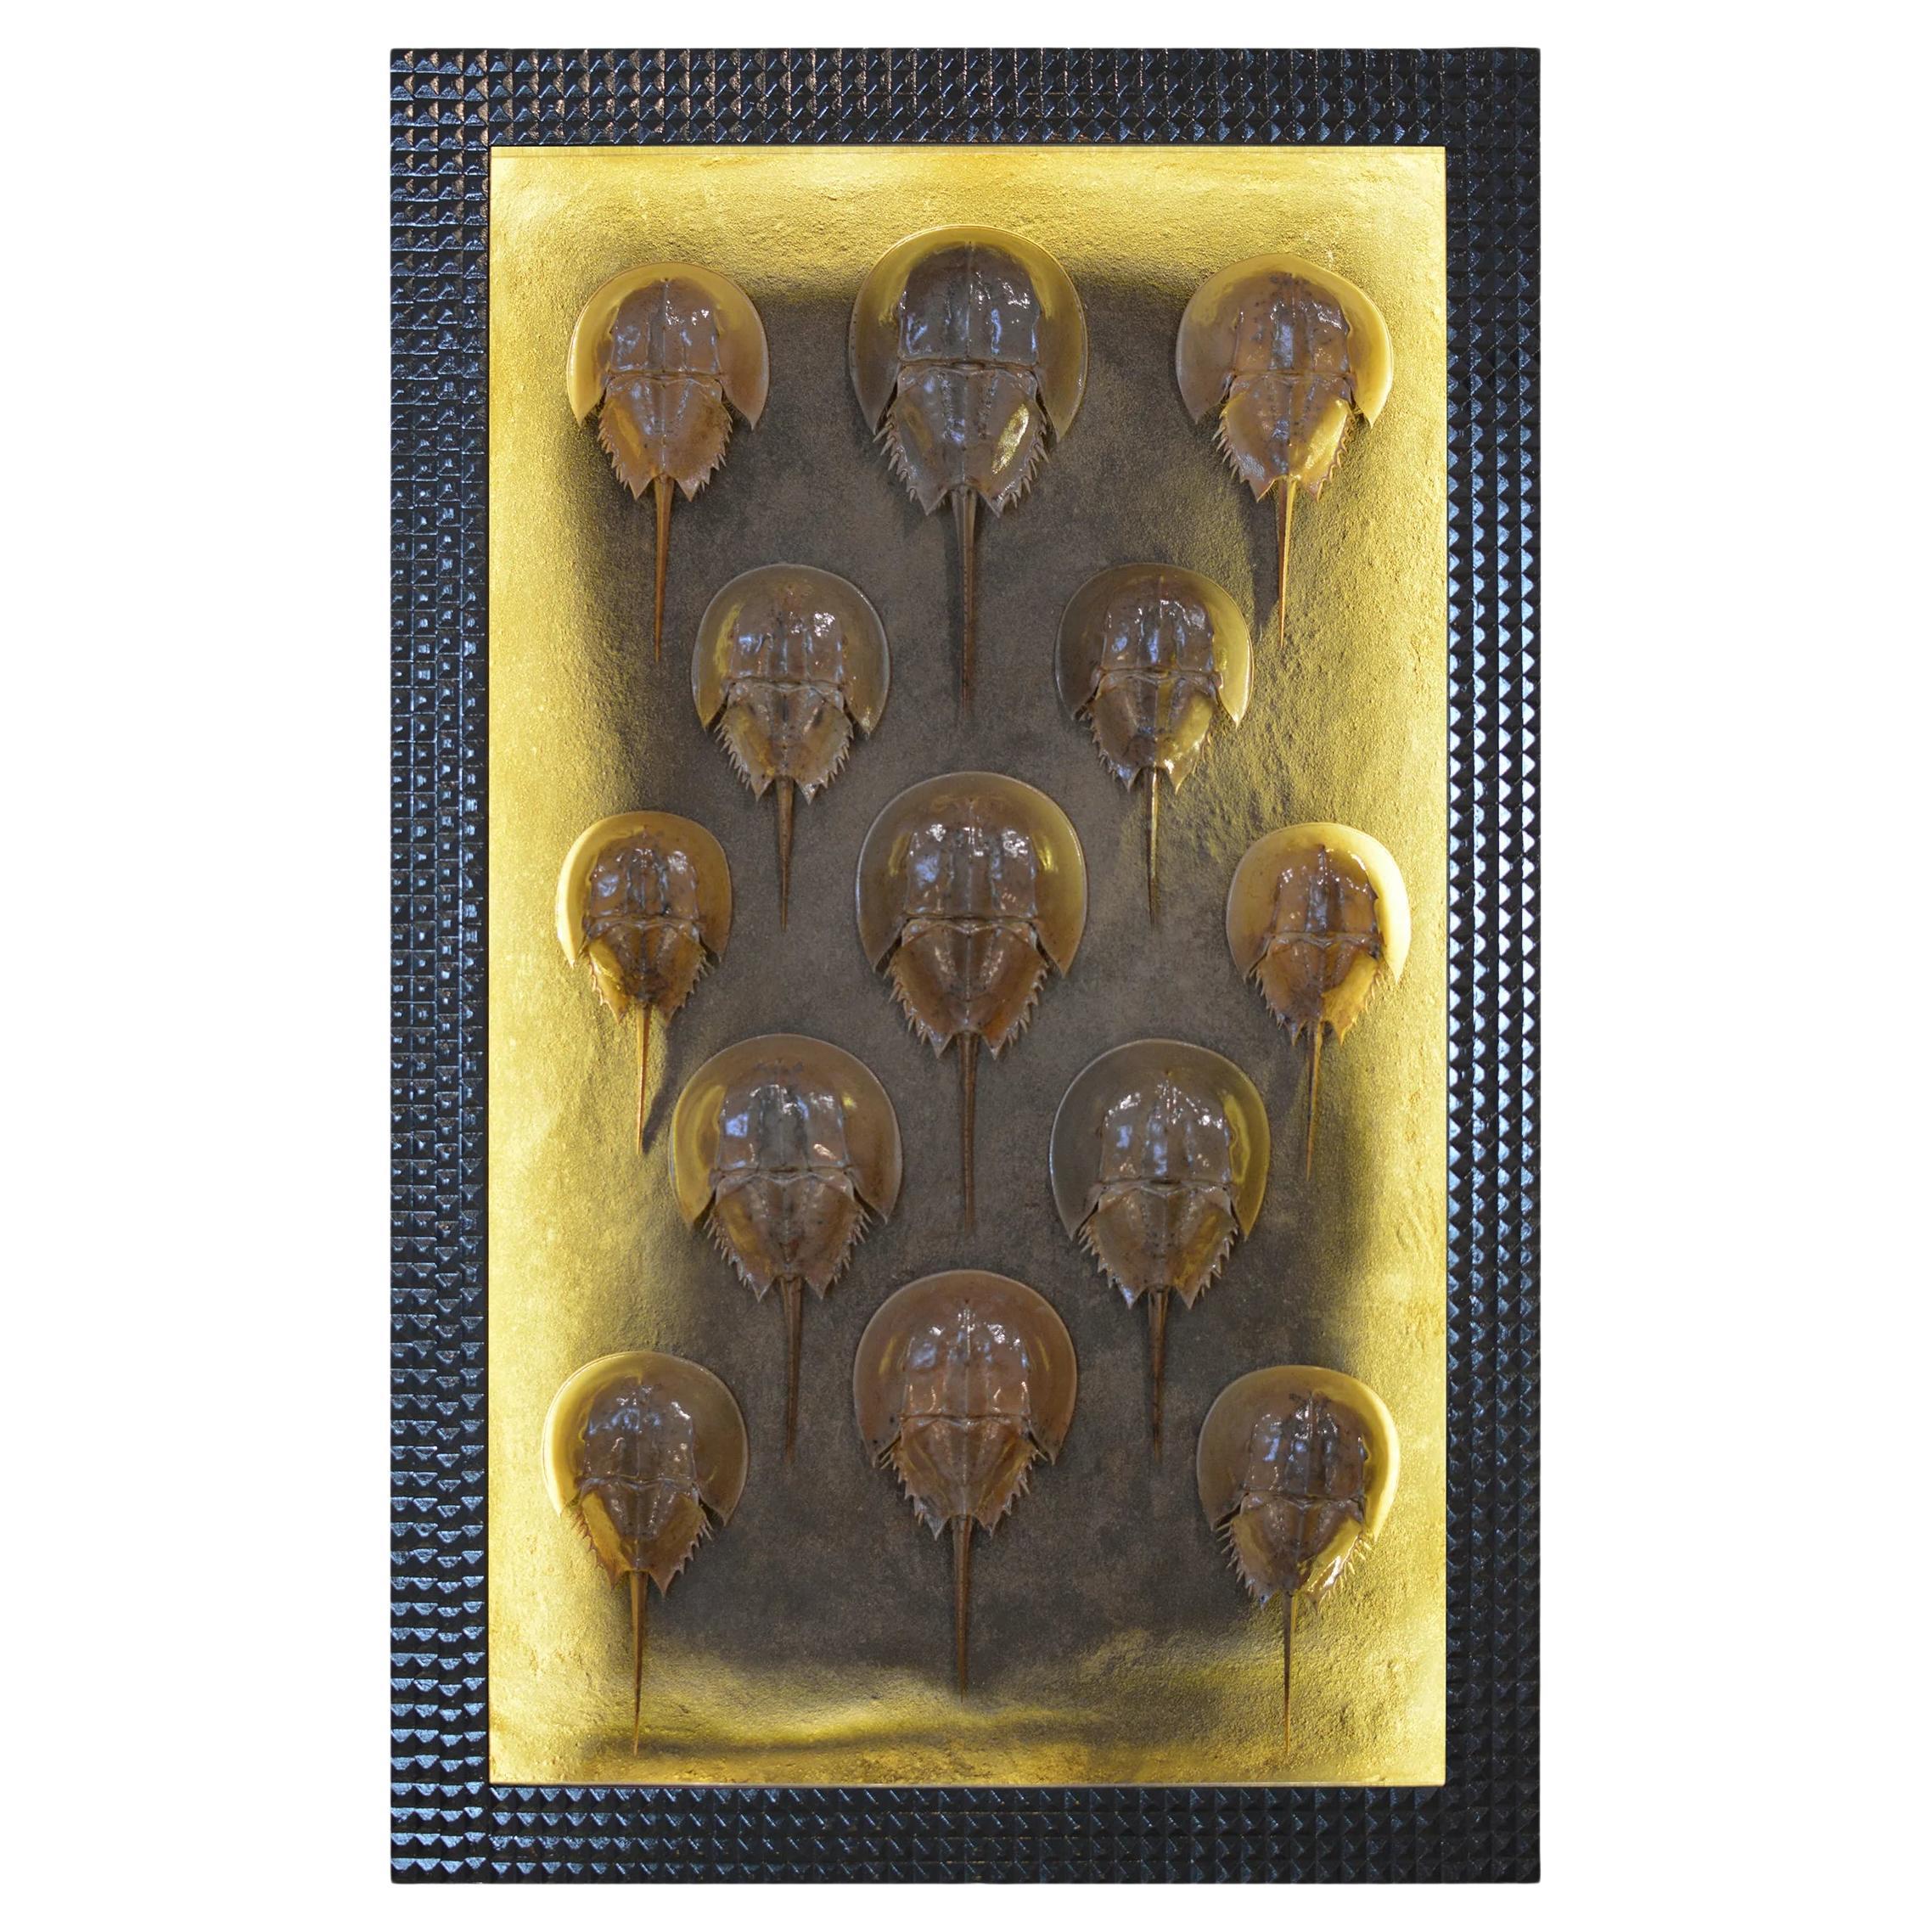 Wall-Sized Illuminated Shadowbox with Horseshoe Crabs by Christopher Tennant